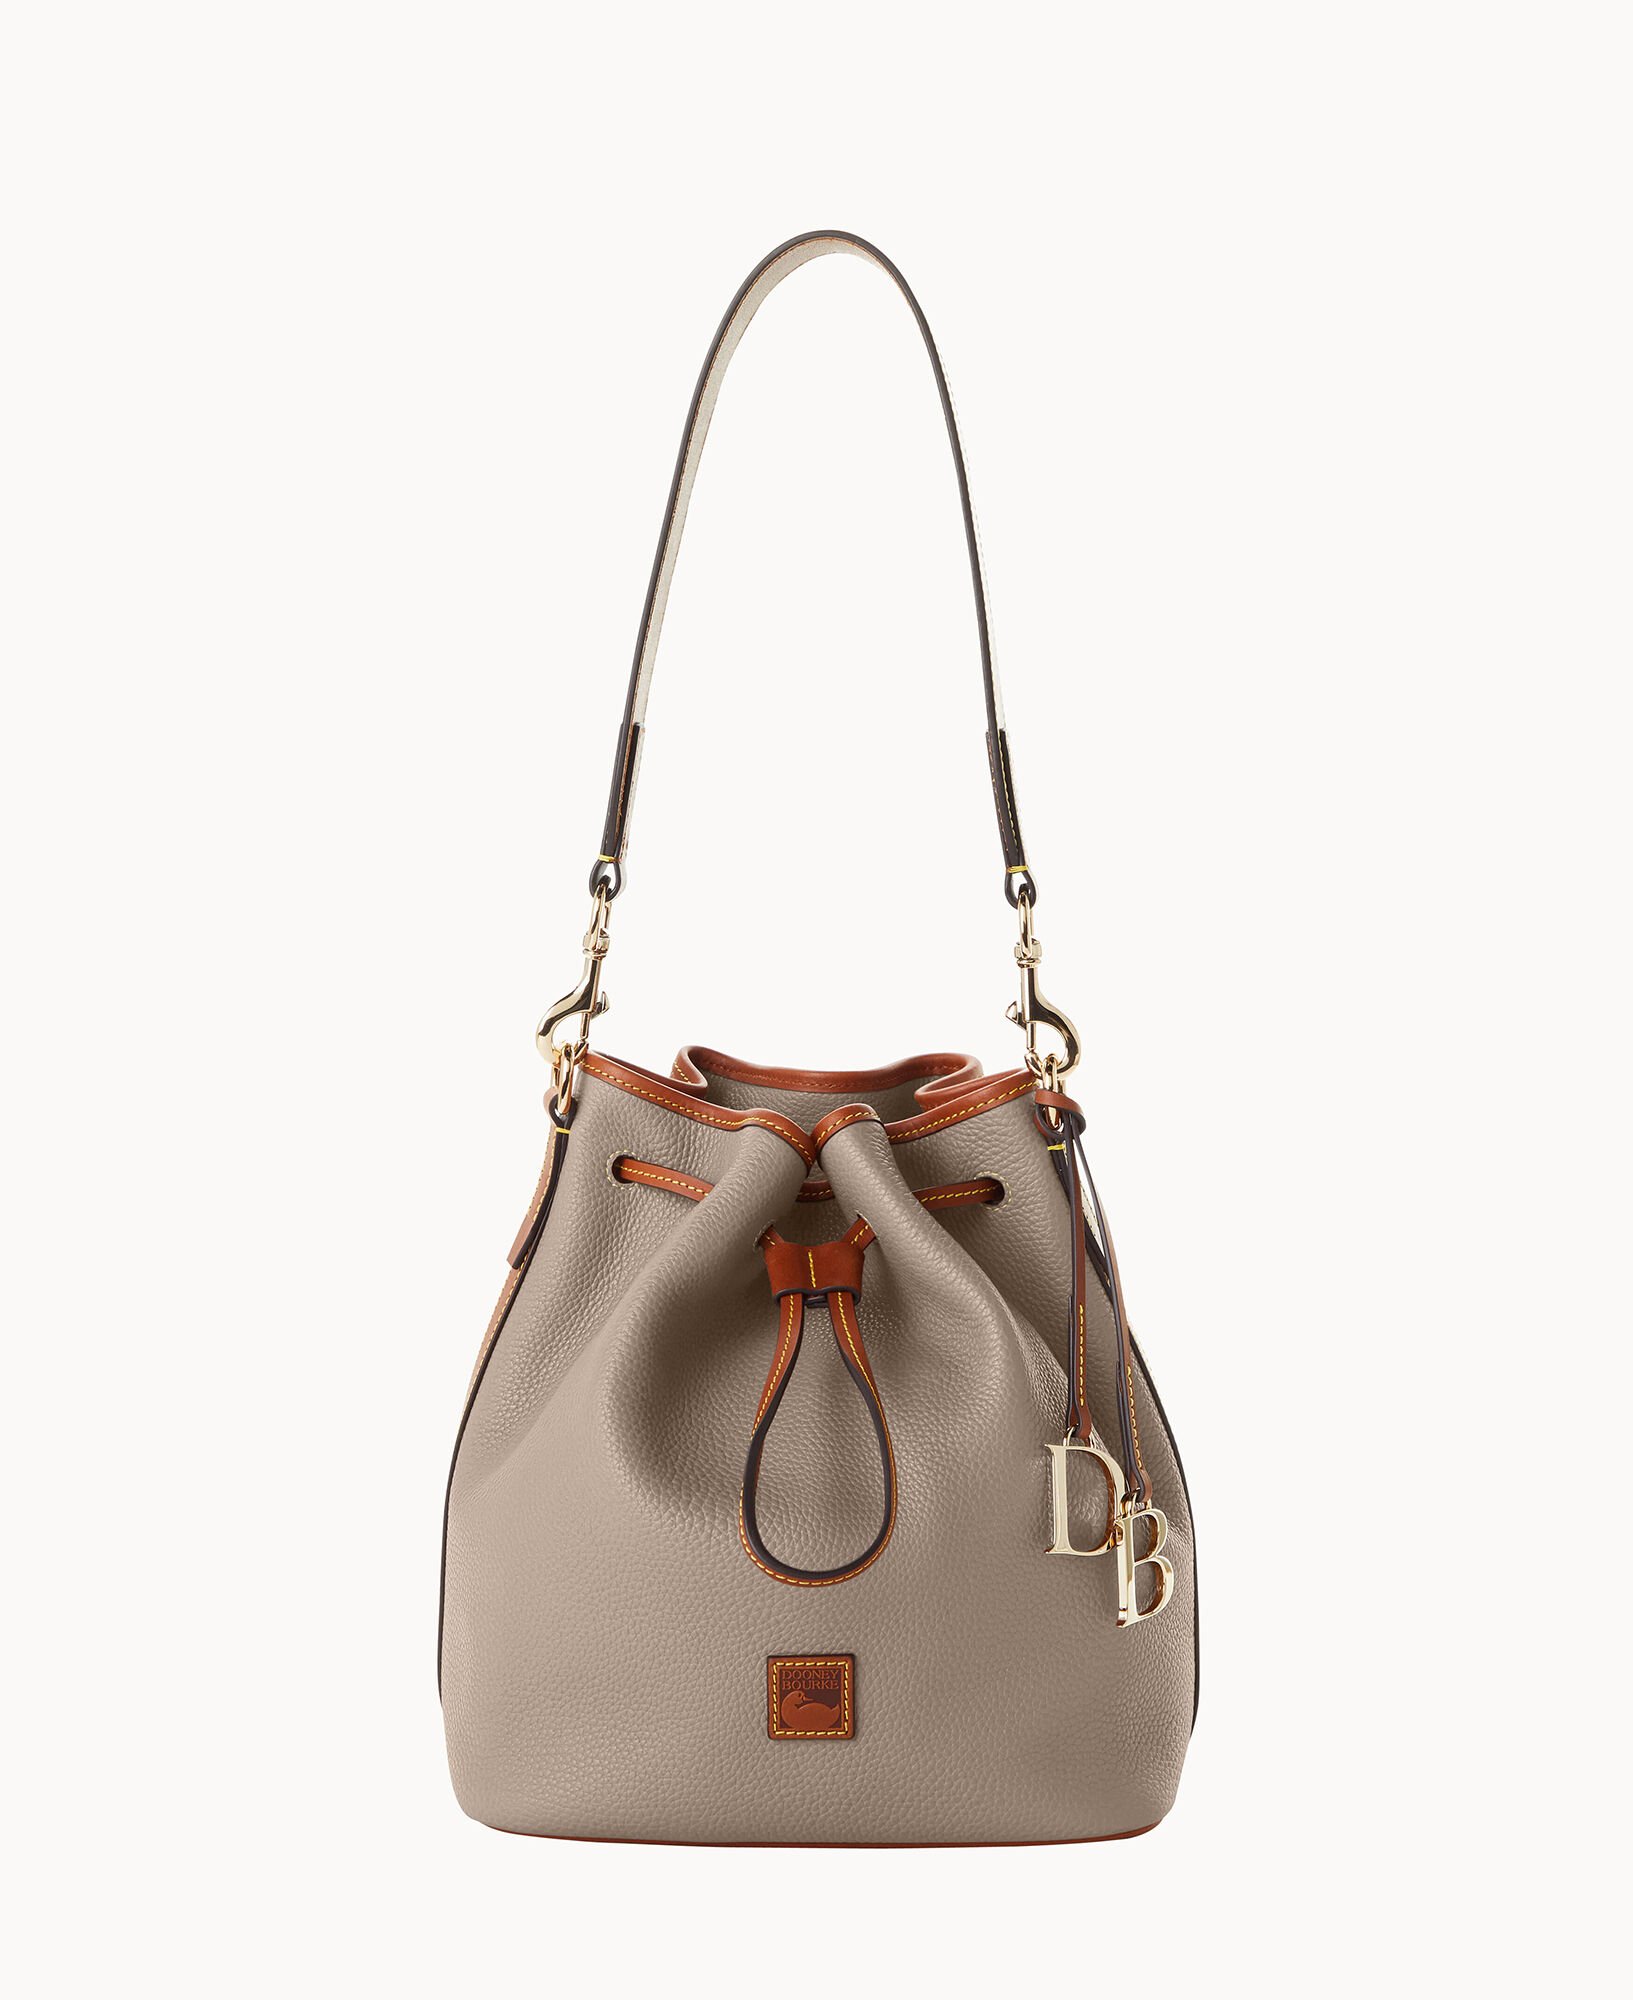 Dooney & Bourke Kendall Pebbled Leather Mini Drawstring Bag with